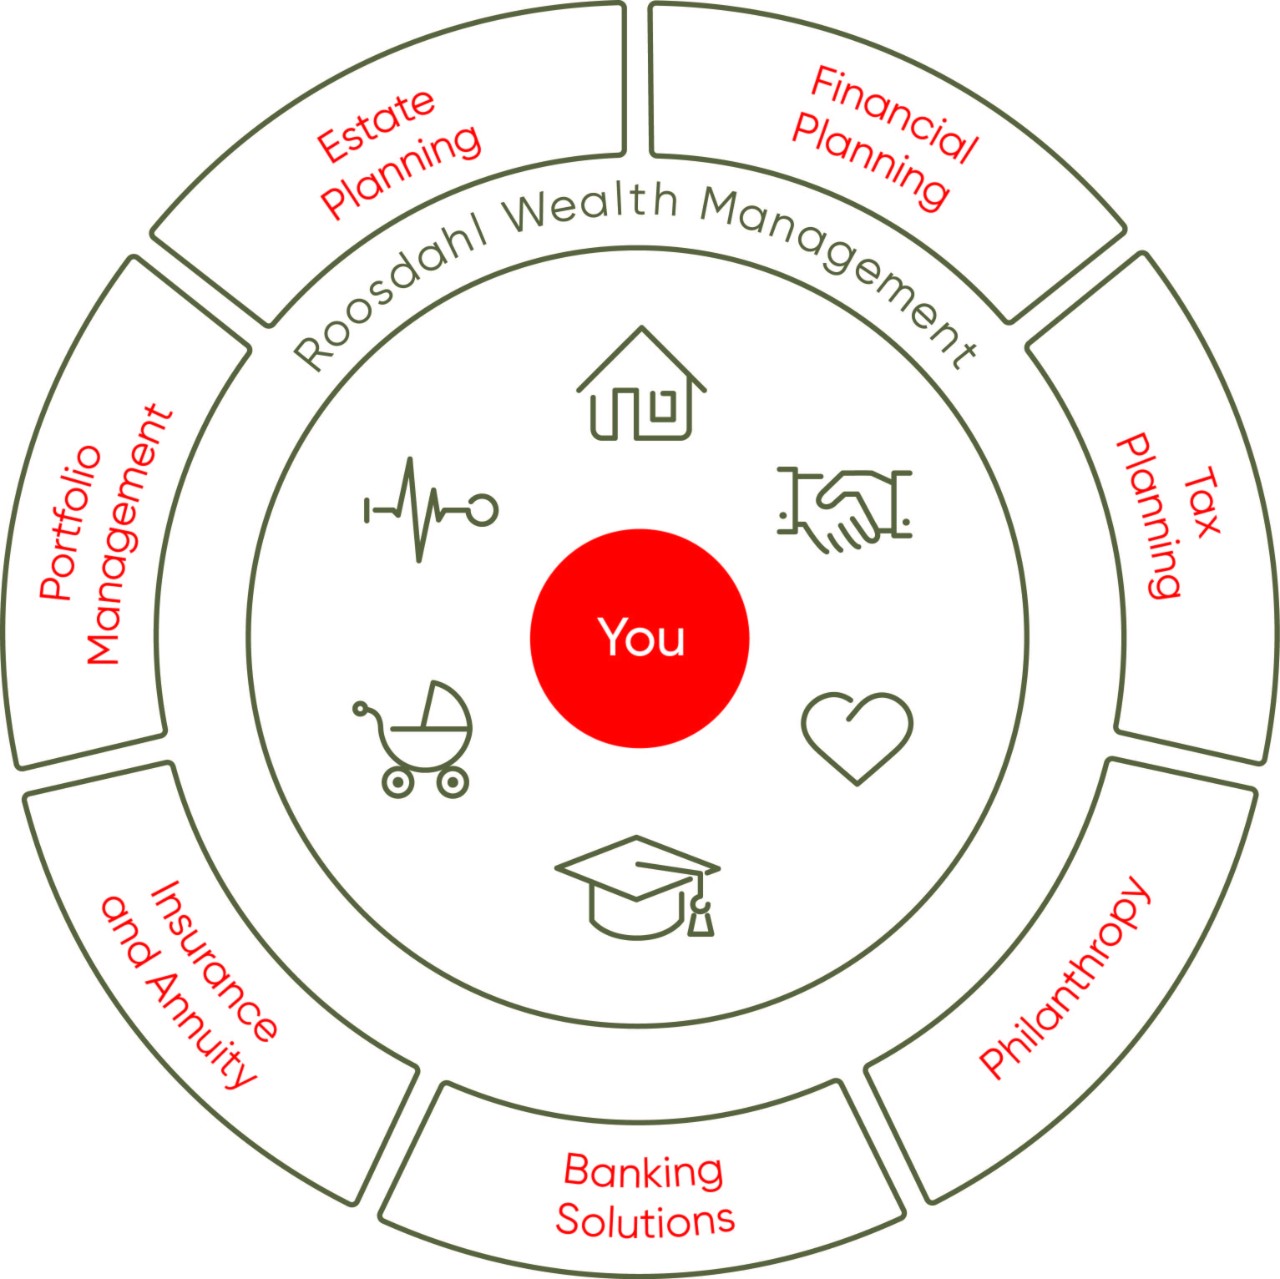 A wheel that represents seven aspects of wealth management expertise.